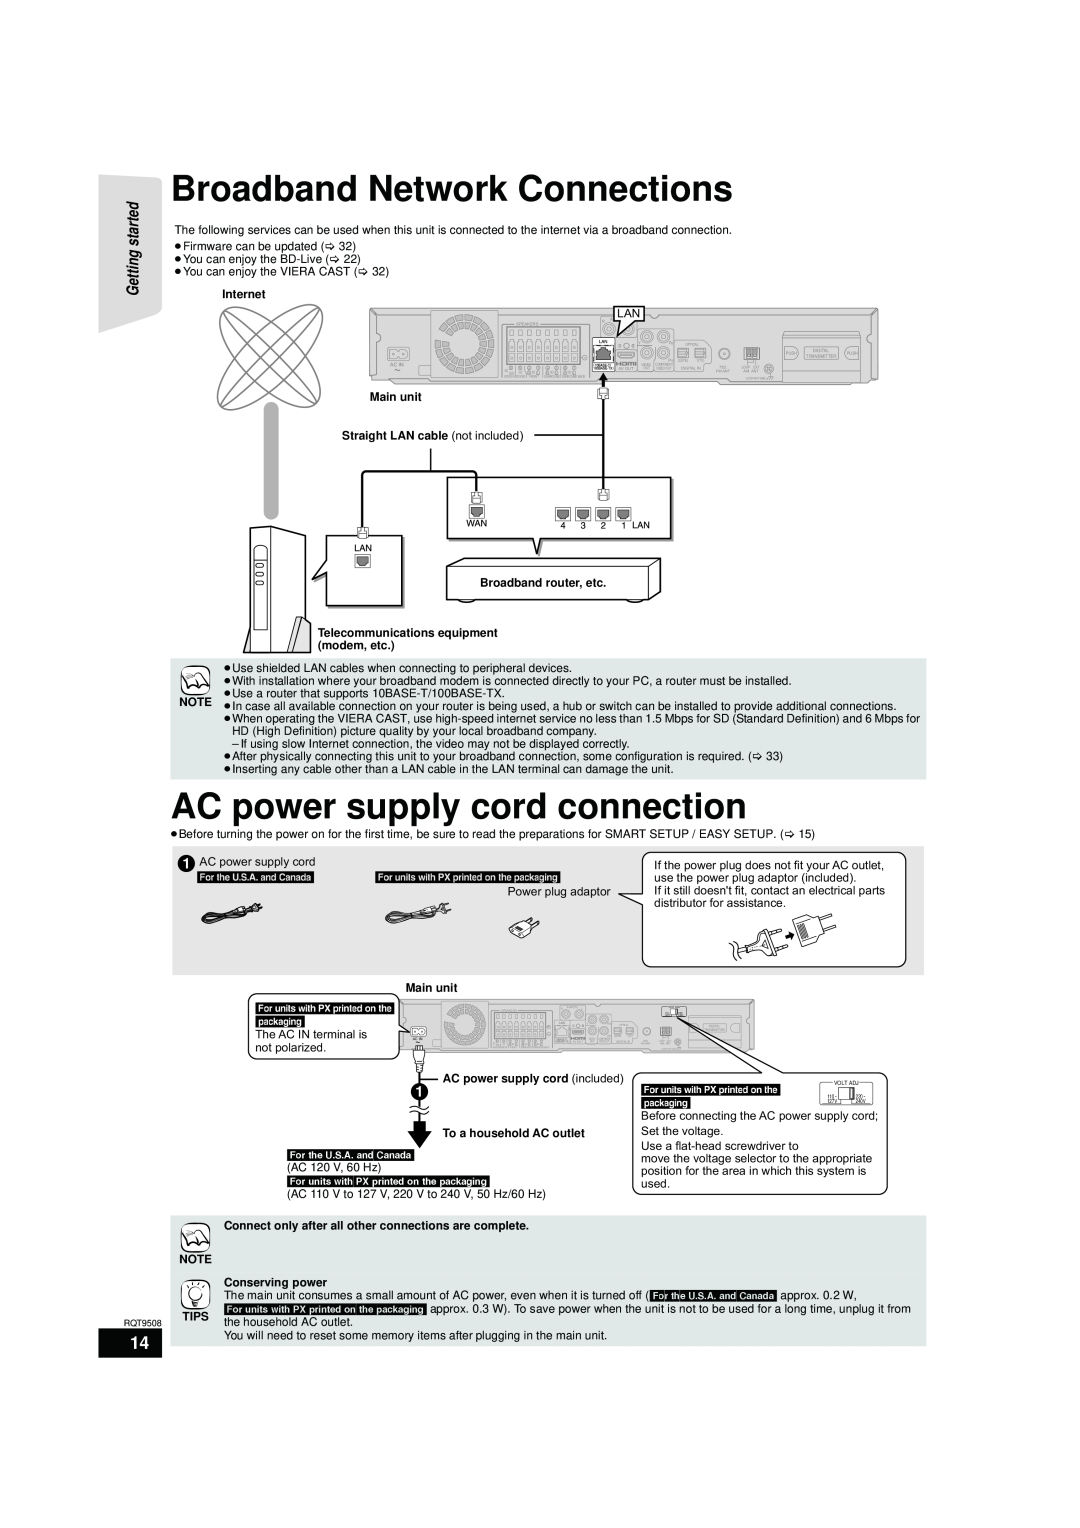 Panasonic SC-BT203, SC-BT200 Broadband Network Connections, AC power supply cord connection, Getting started, packaging 